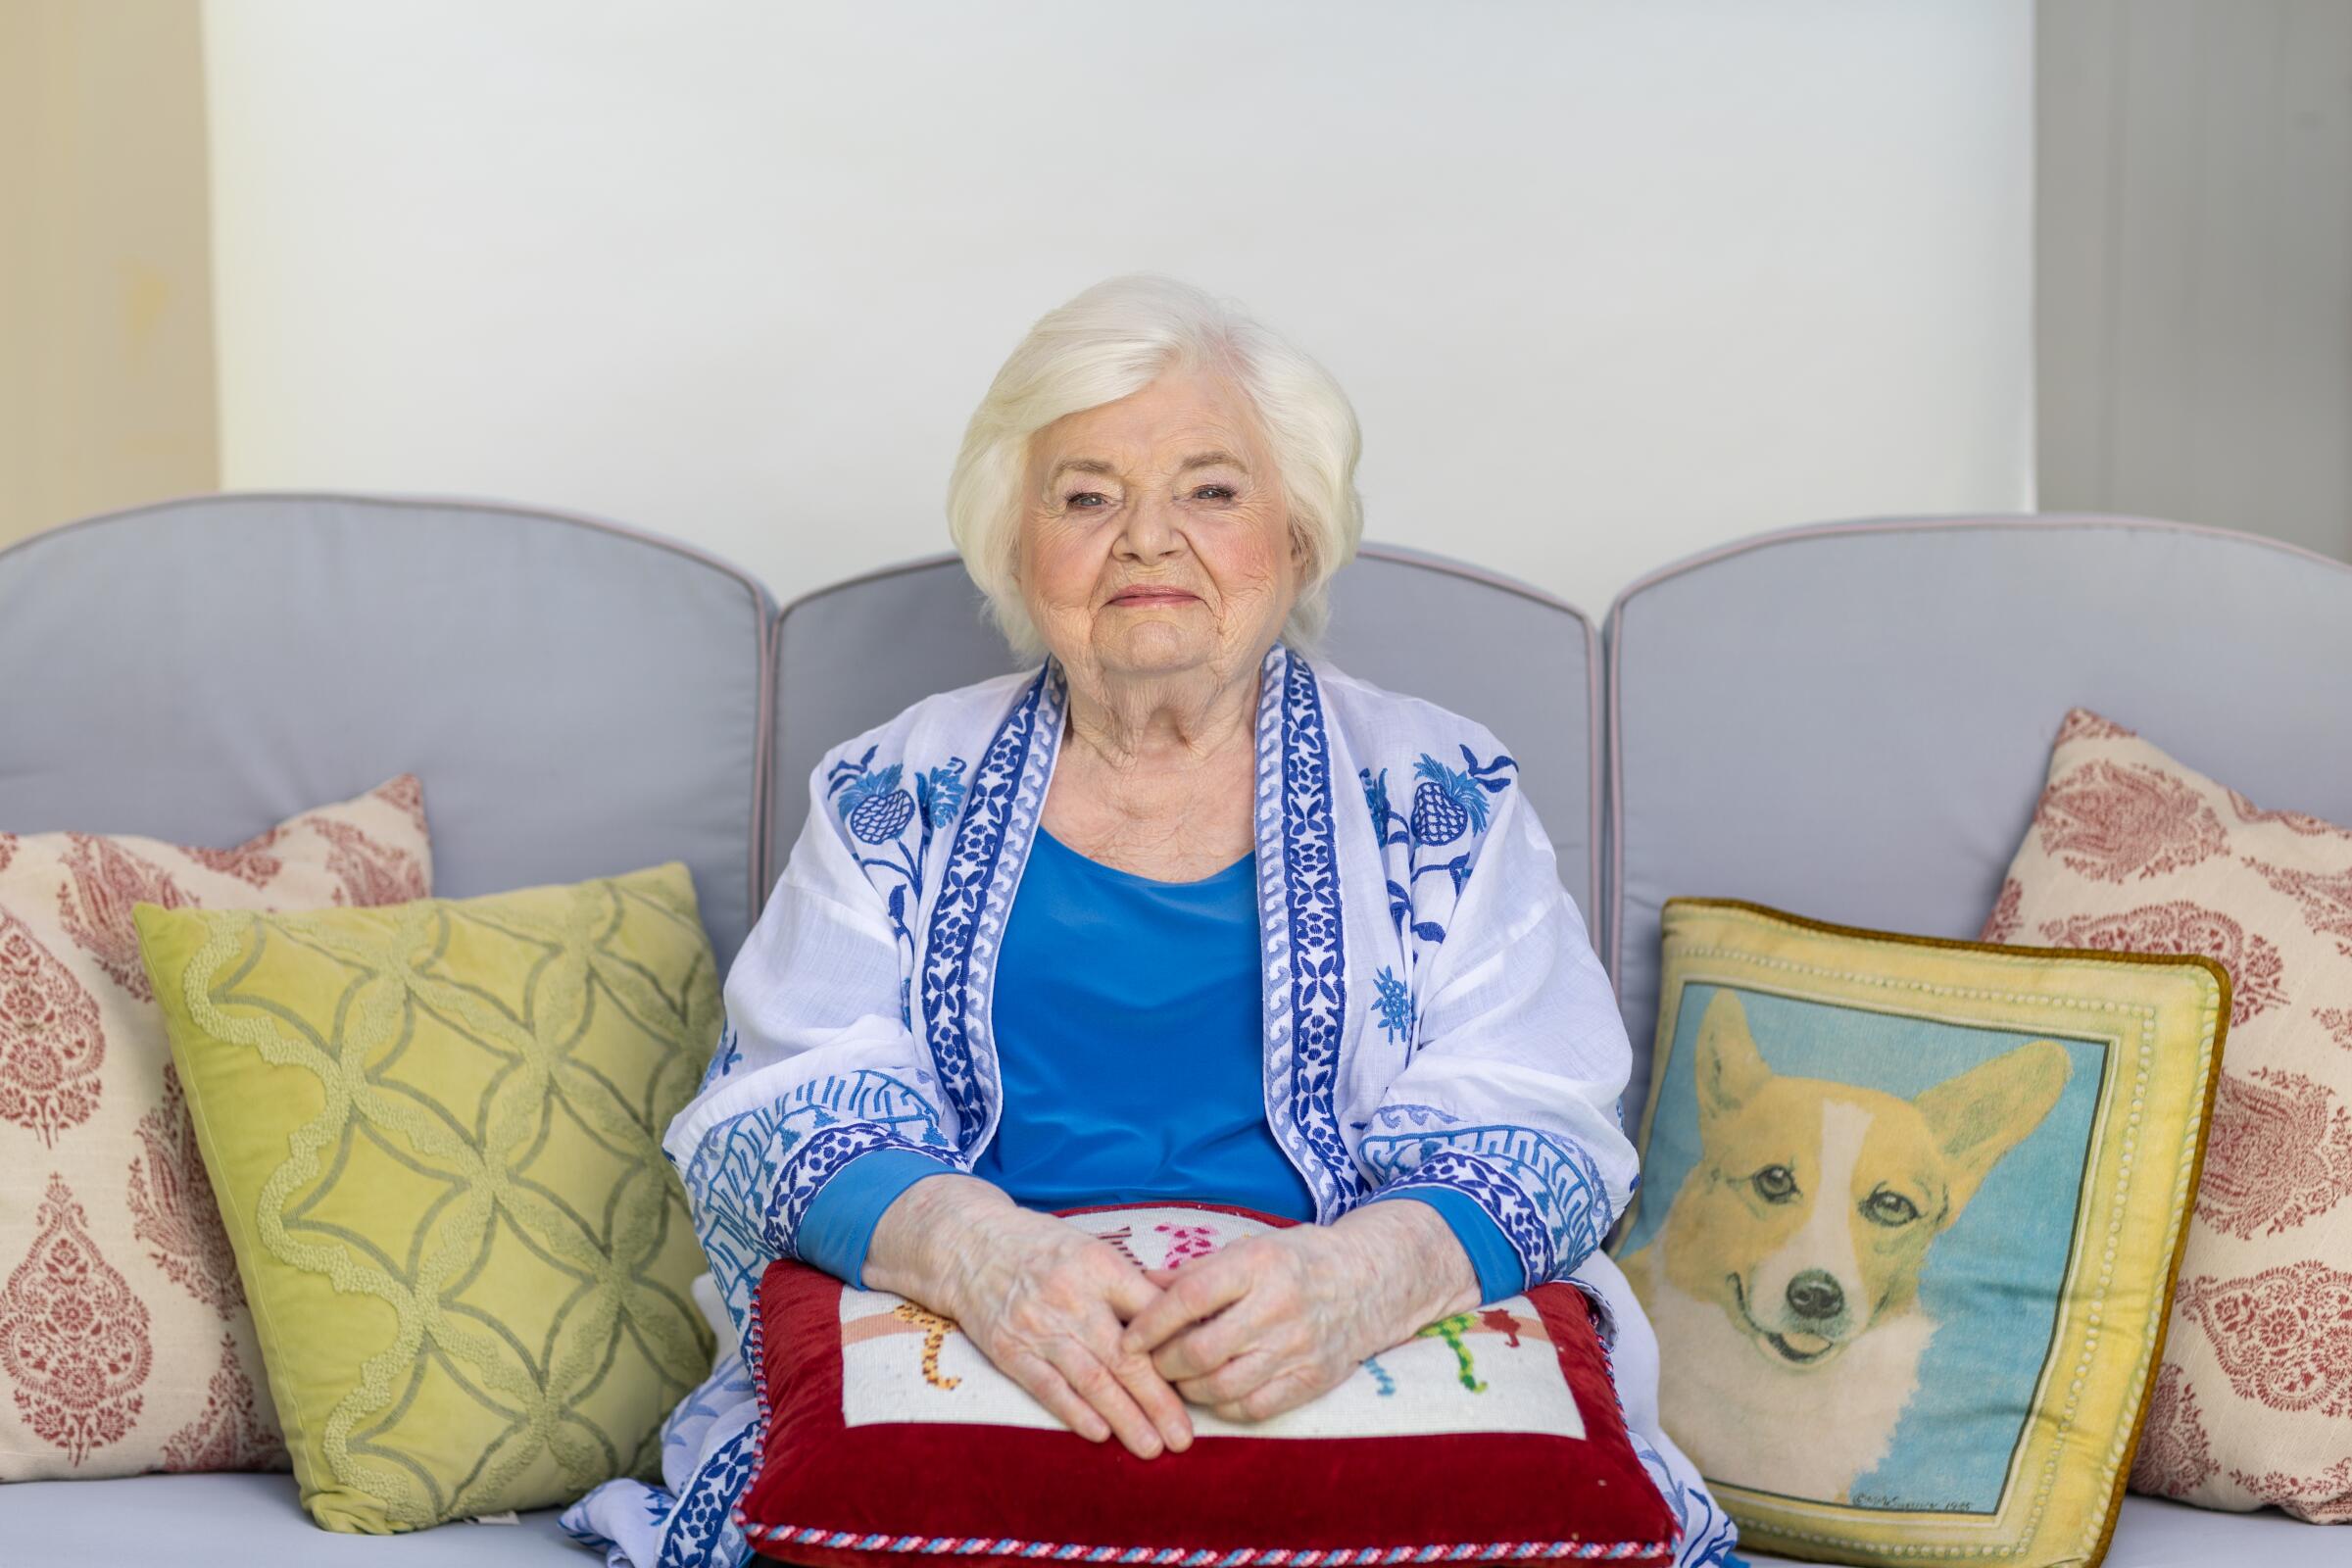 A smiling elderly woman sits on a couch next to her dog pillow.